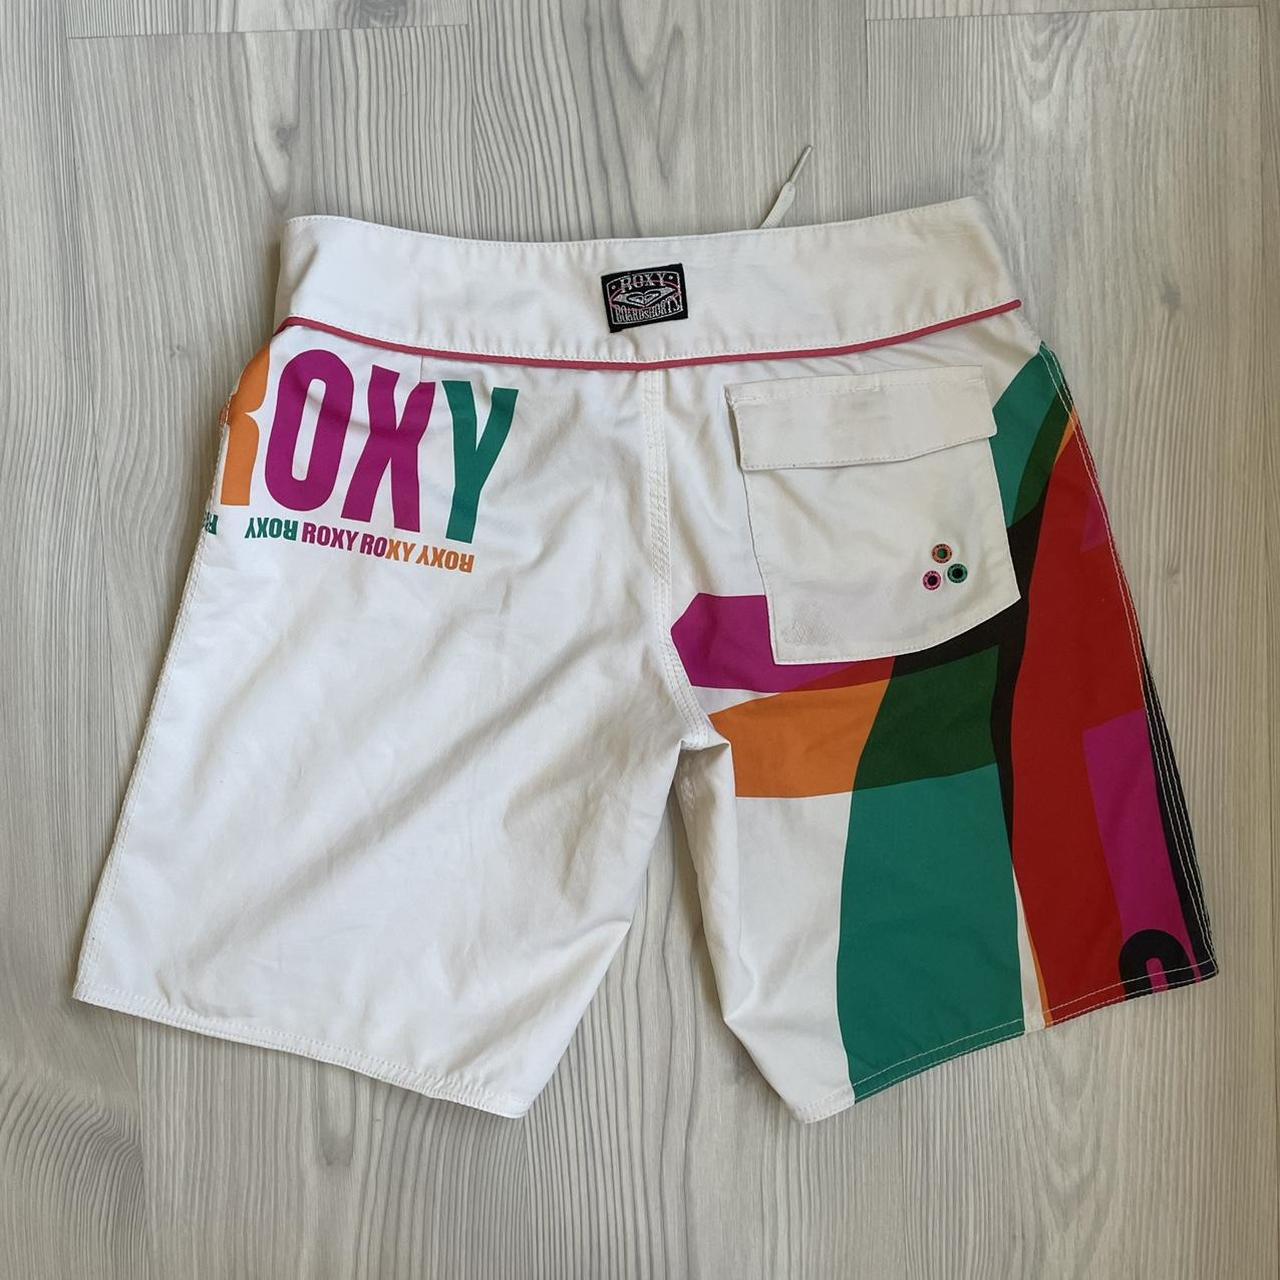 Product Image 4 - insane y2k roxy shorts
perfect condition
xs